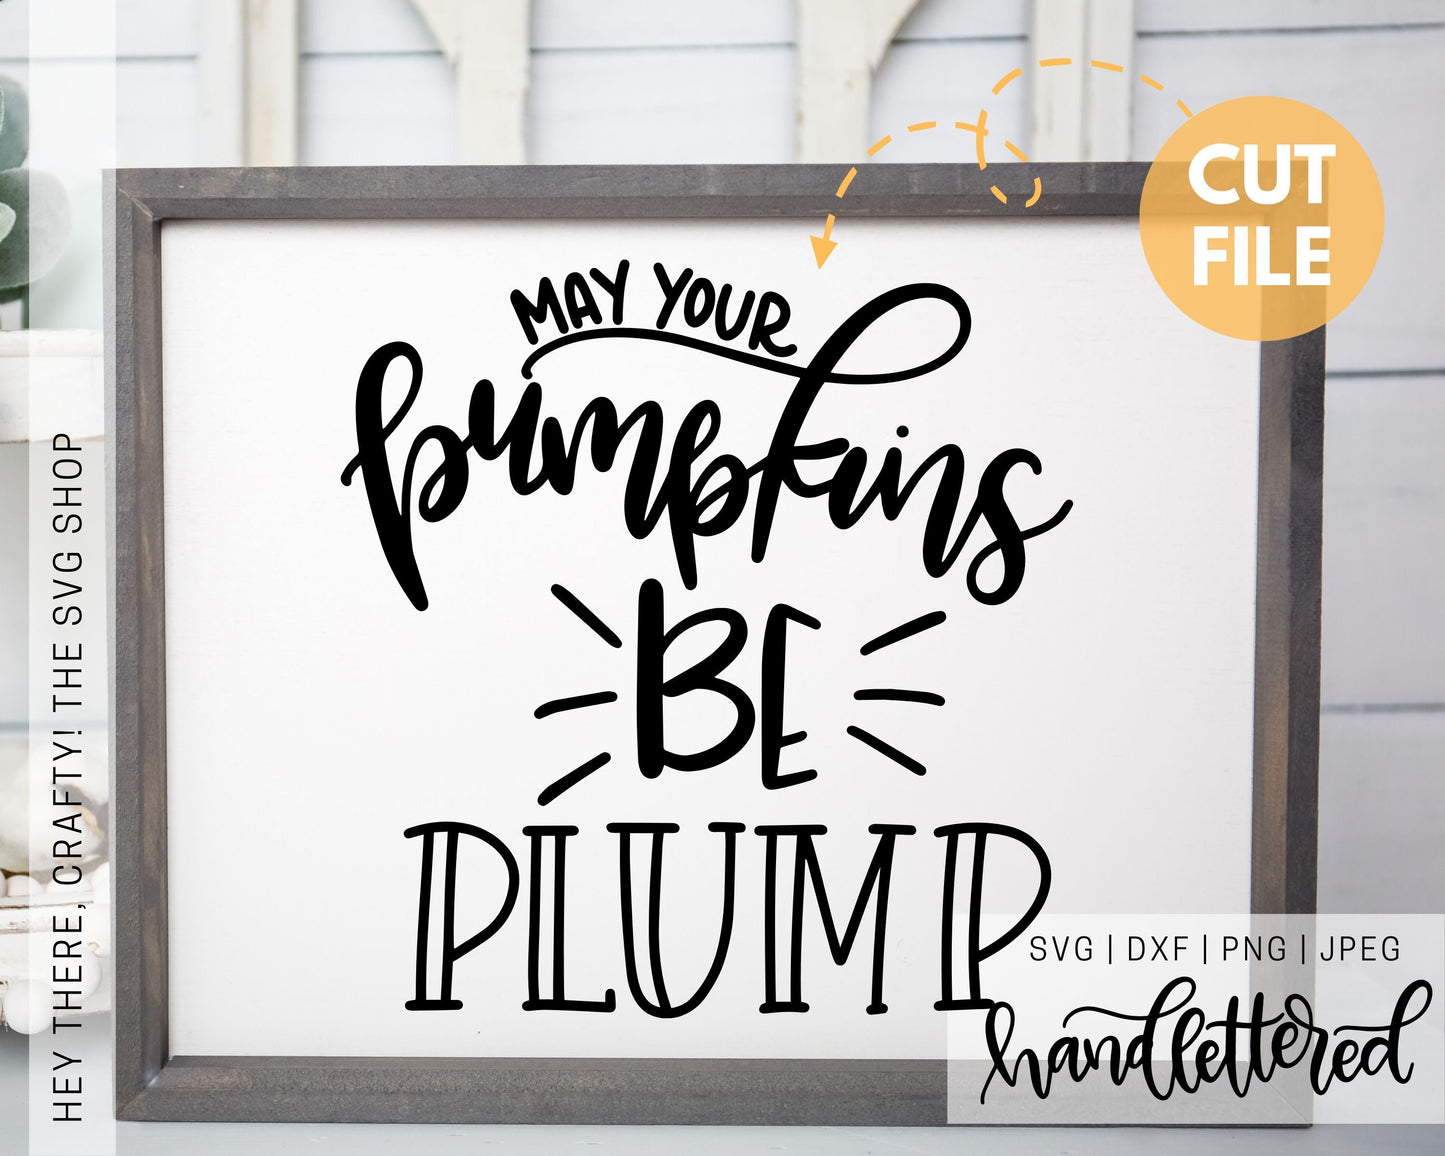 May Your Pumpkins be Plump | SVG, PNG, DXF, JPEG